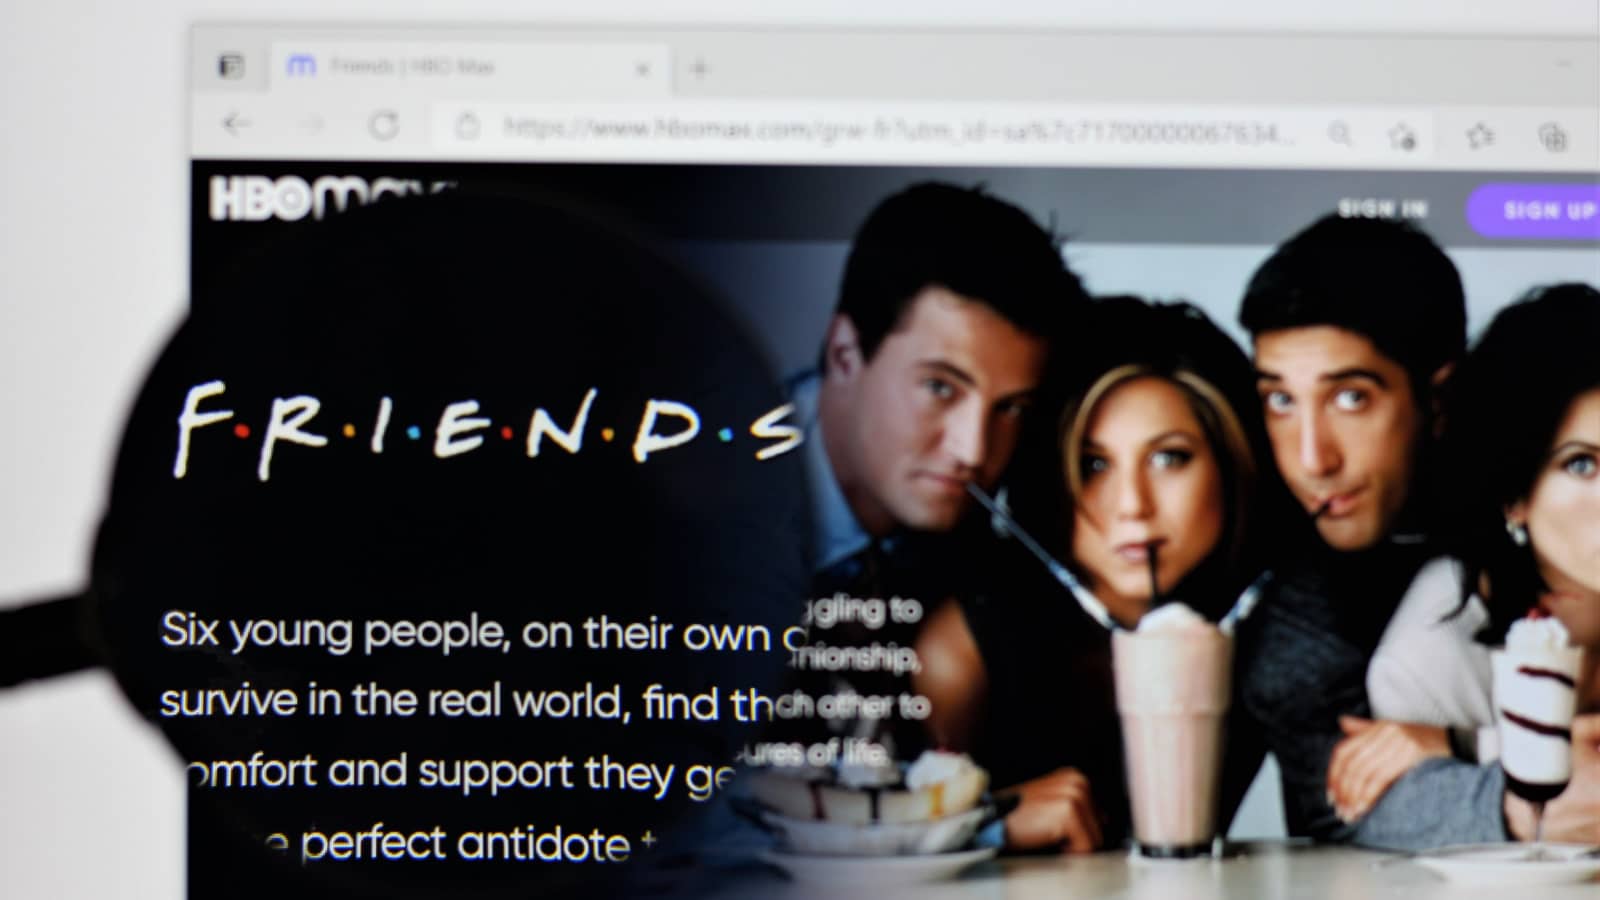 Miami, FL, USA: April 2021: Friends is an American comedy television sitcom, created by David Crane and Marta Kauffman, which aired on NBC for 10 seasons. Airing on HBO max, FRIENDS reunion